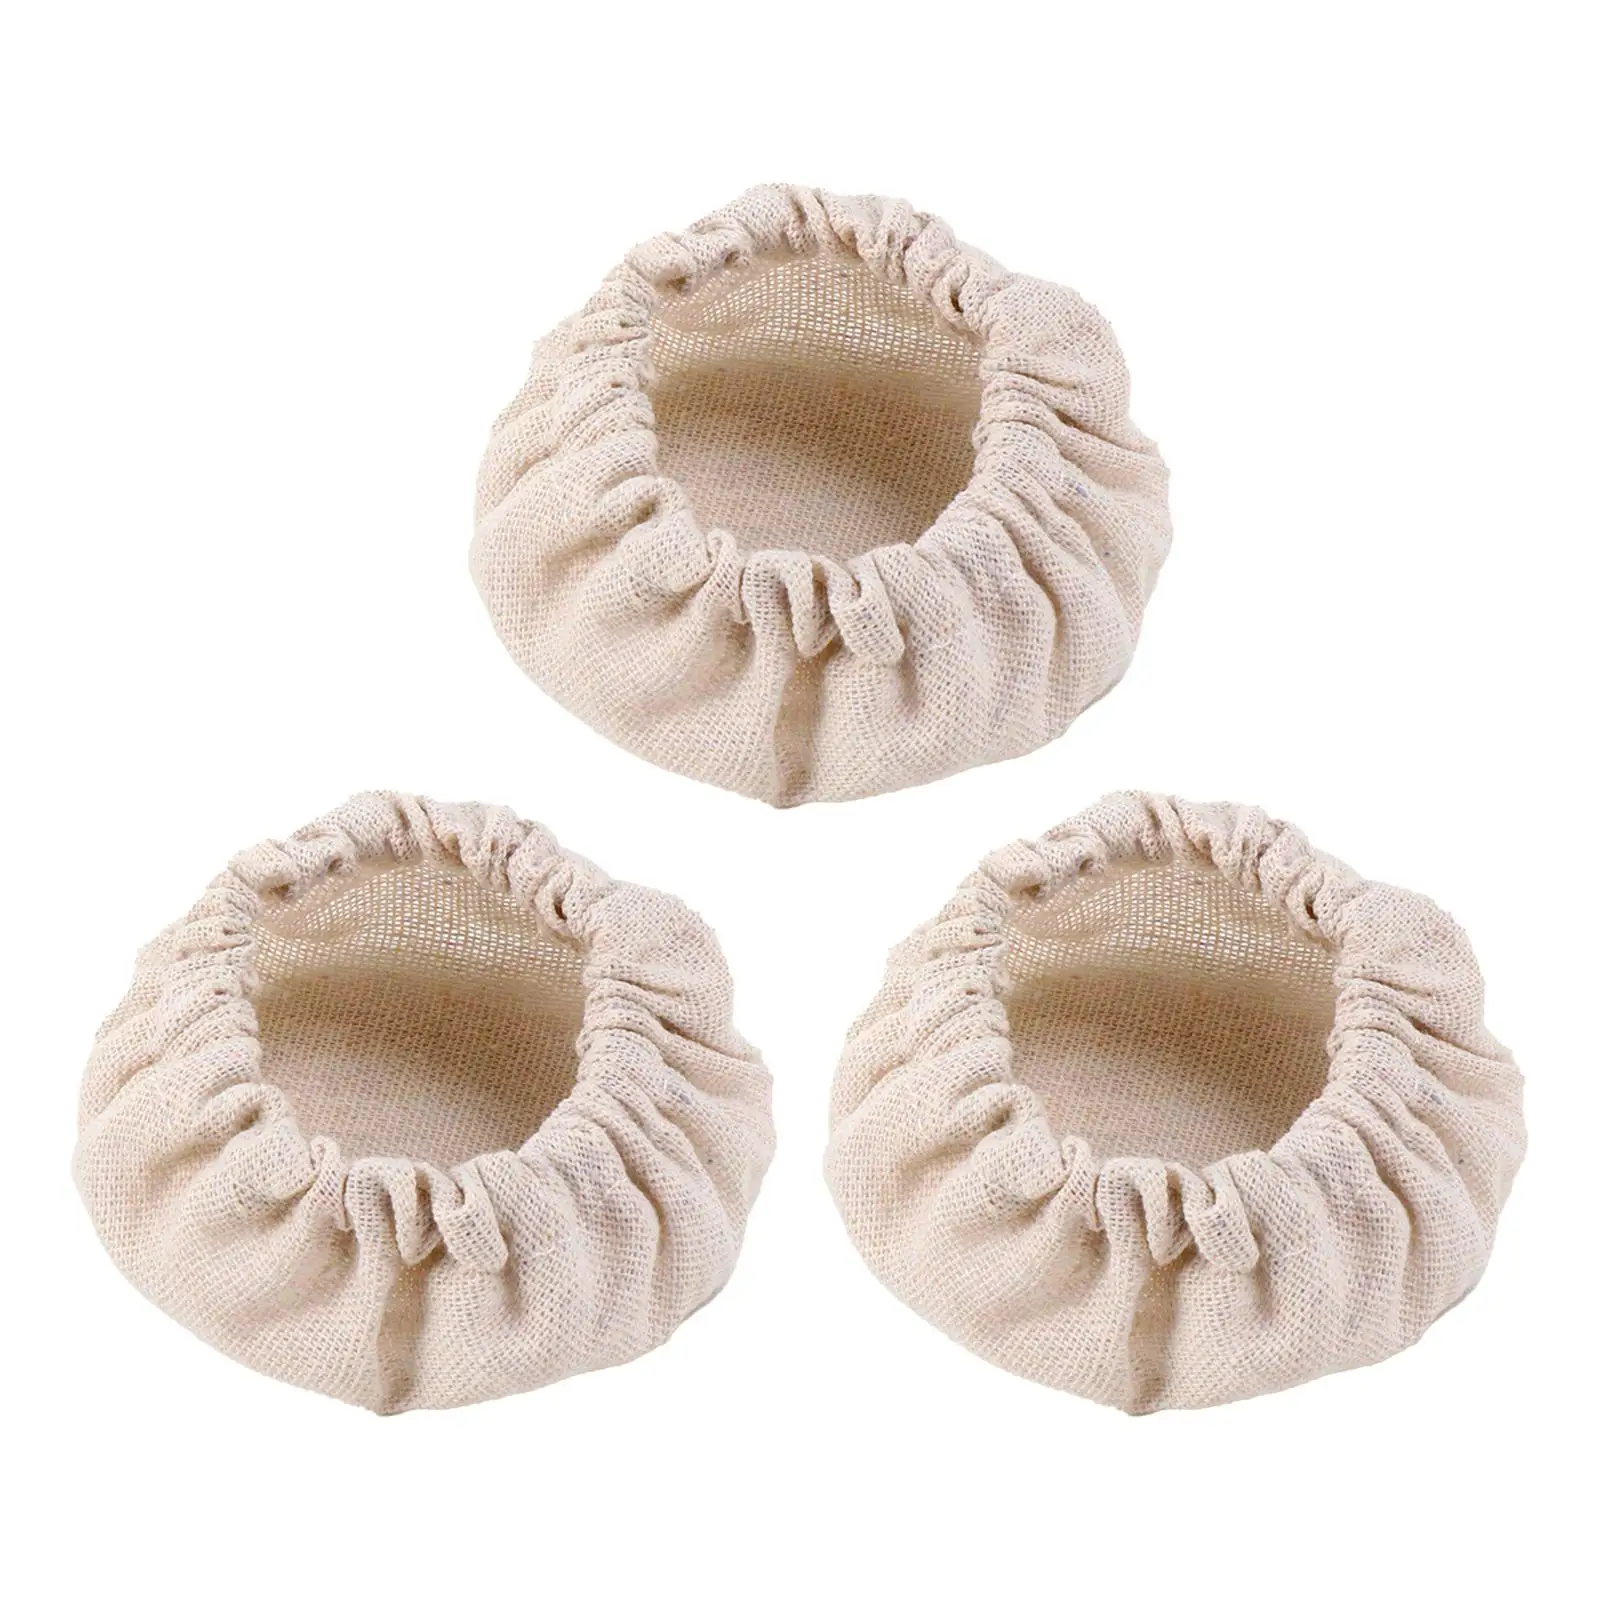 3x Cloth Jar Covers Baking Supplies 3 inch to 4 inch Bread Baking Cafe Wide Mouth Elastic Sourdough Starter Glass Jar Cover